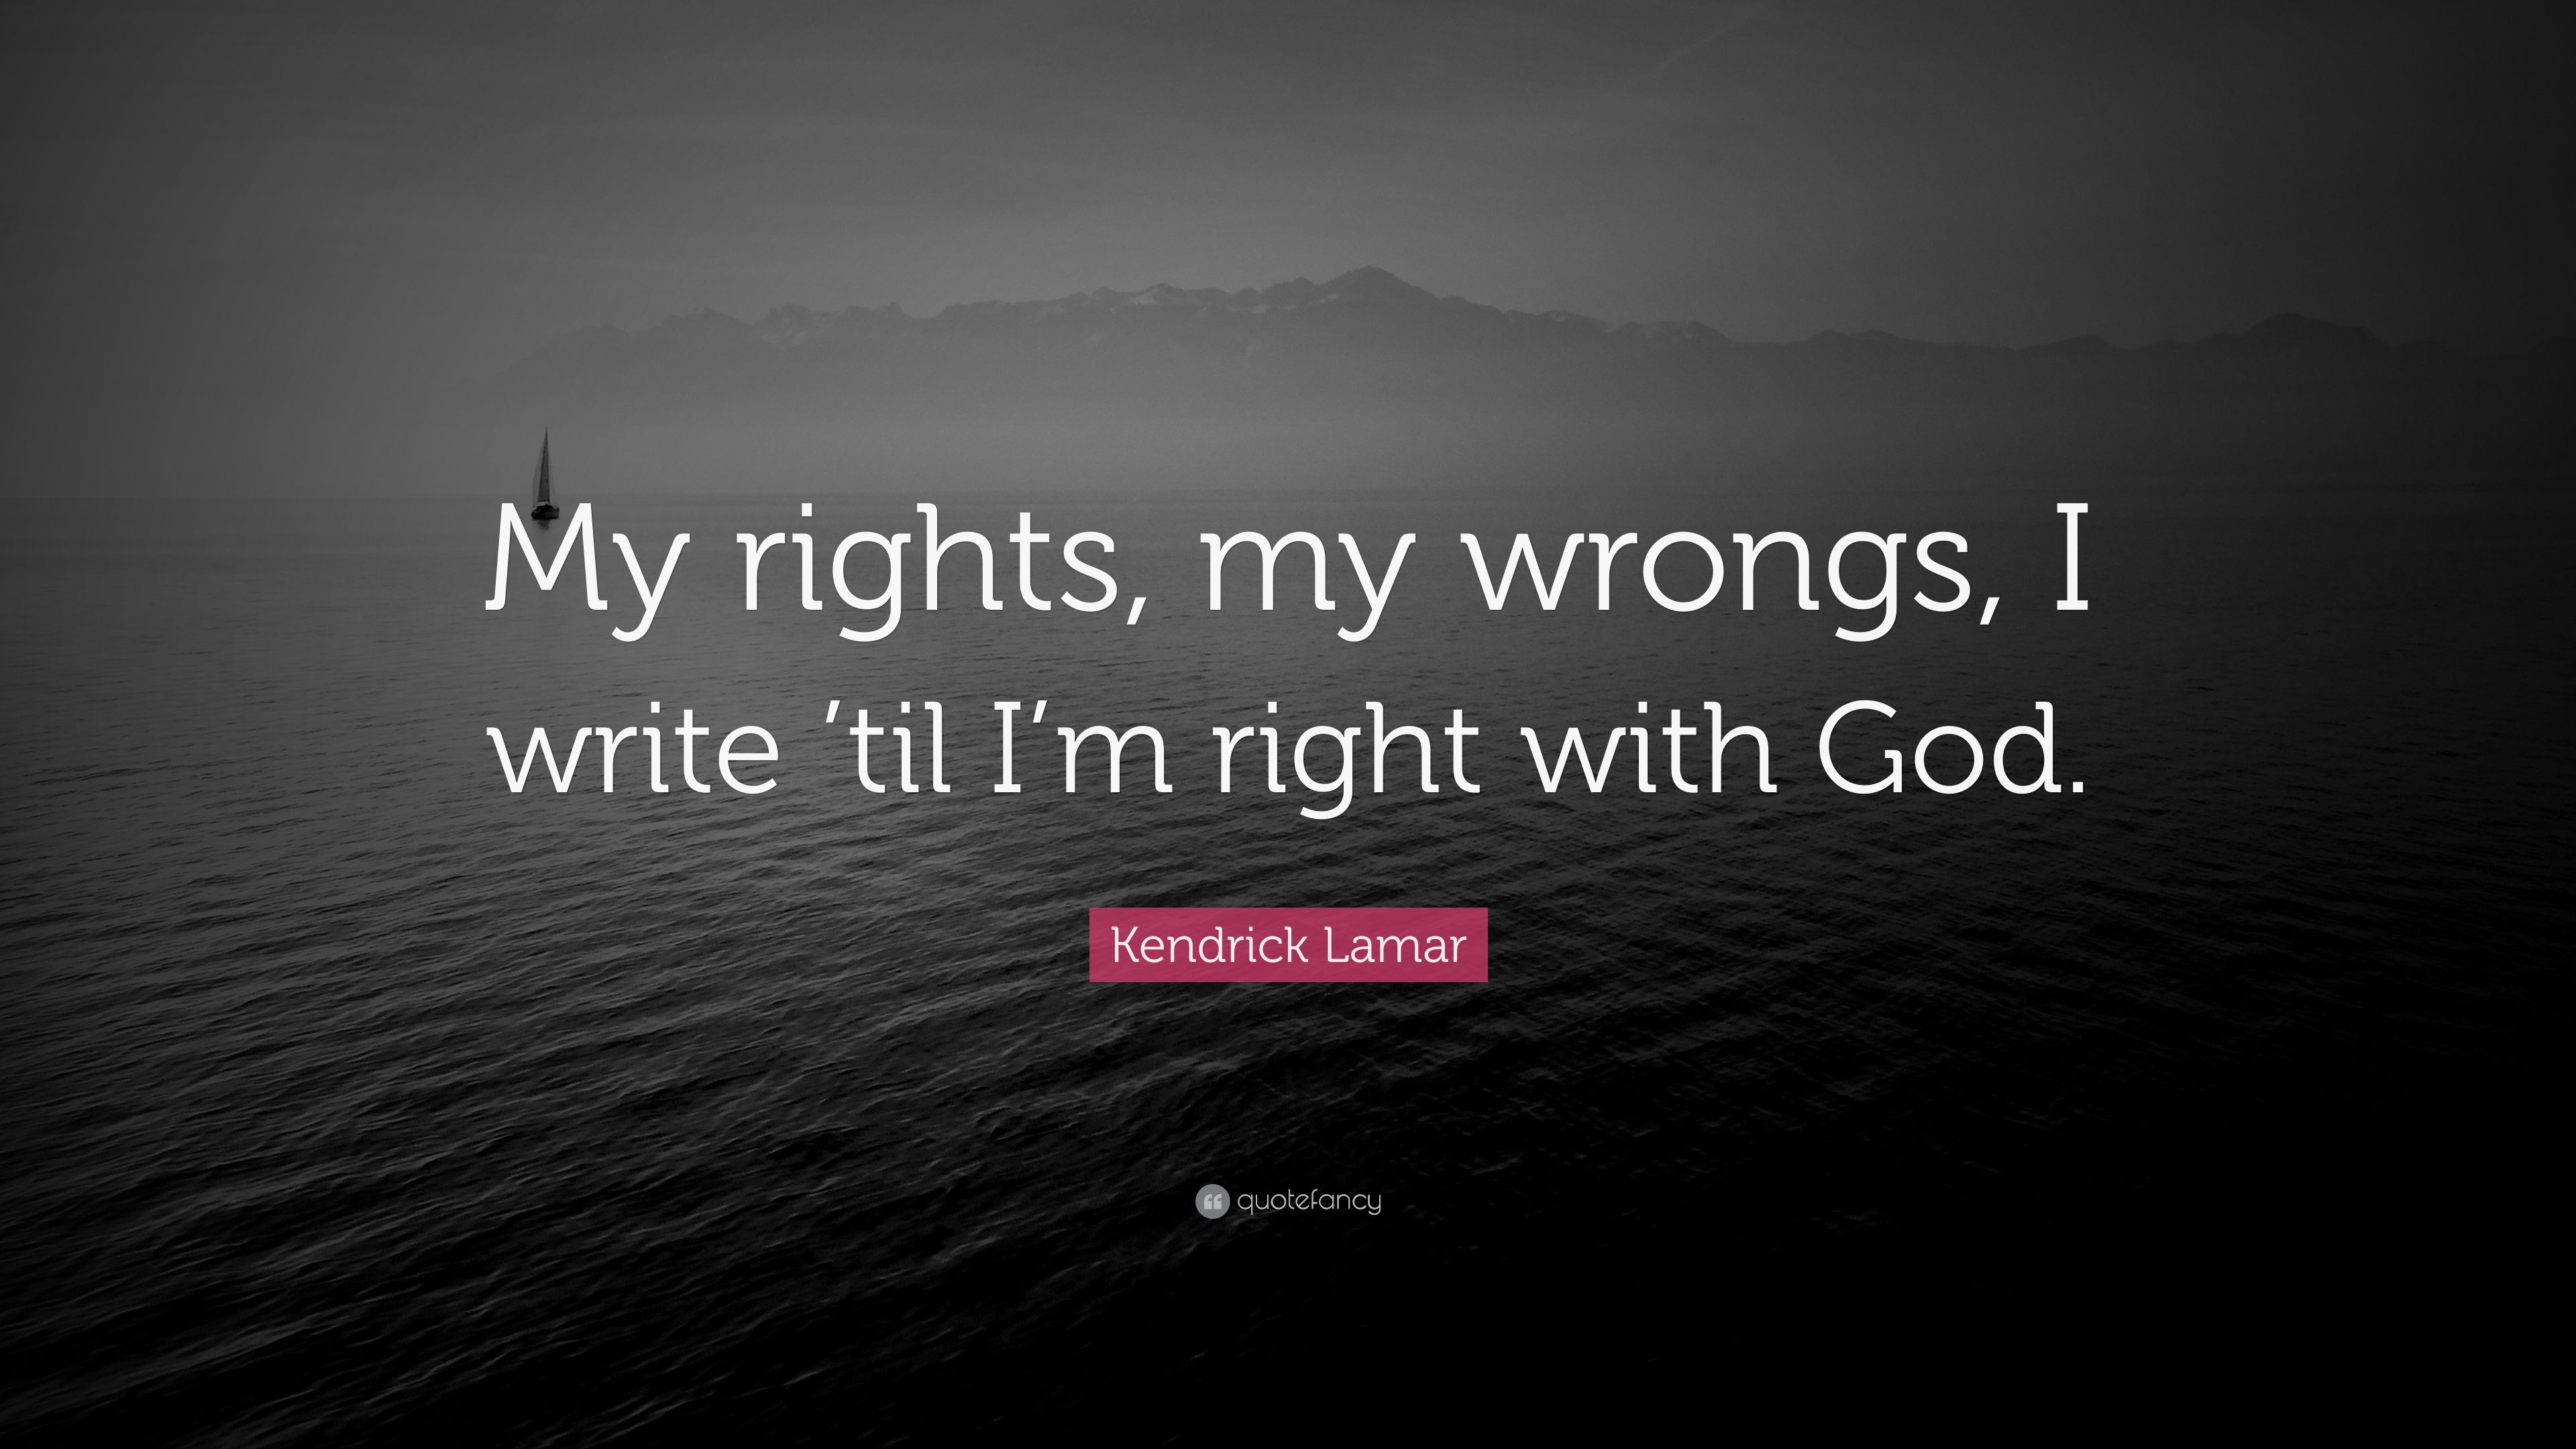 Kendrick Lamar Quote: “My rights, my wrongs, I write 'til I'm right with God.” (7 wallpaper)